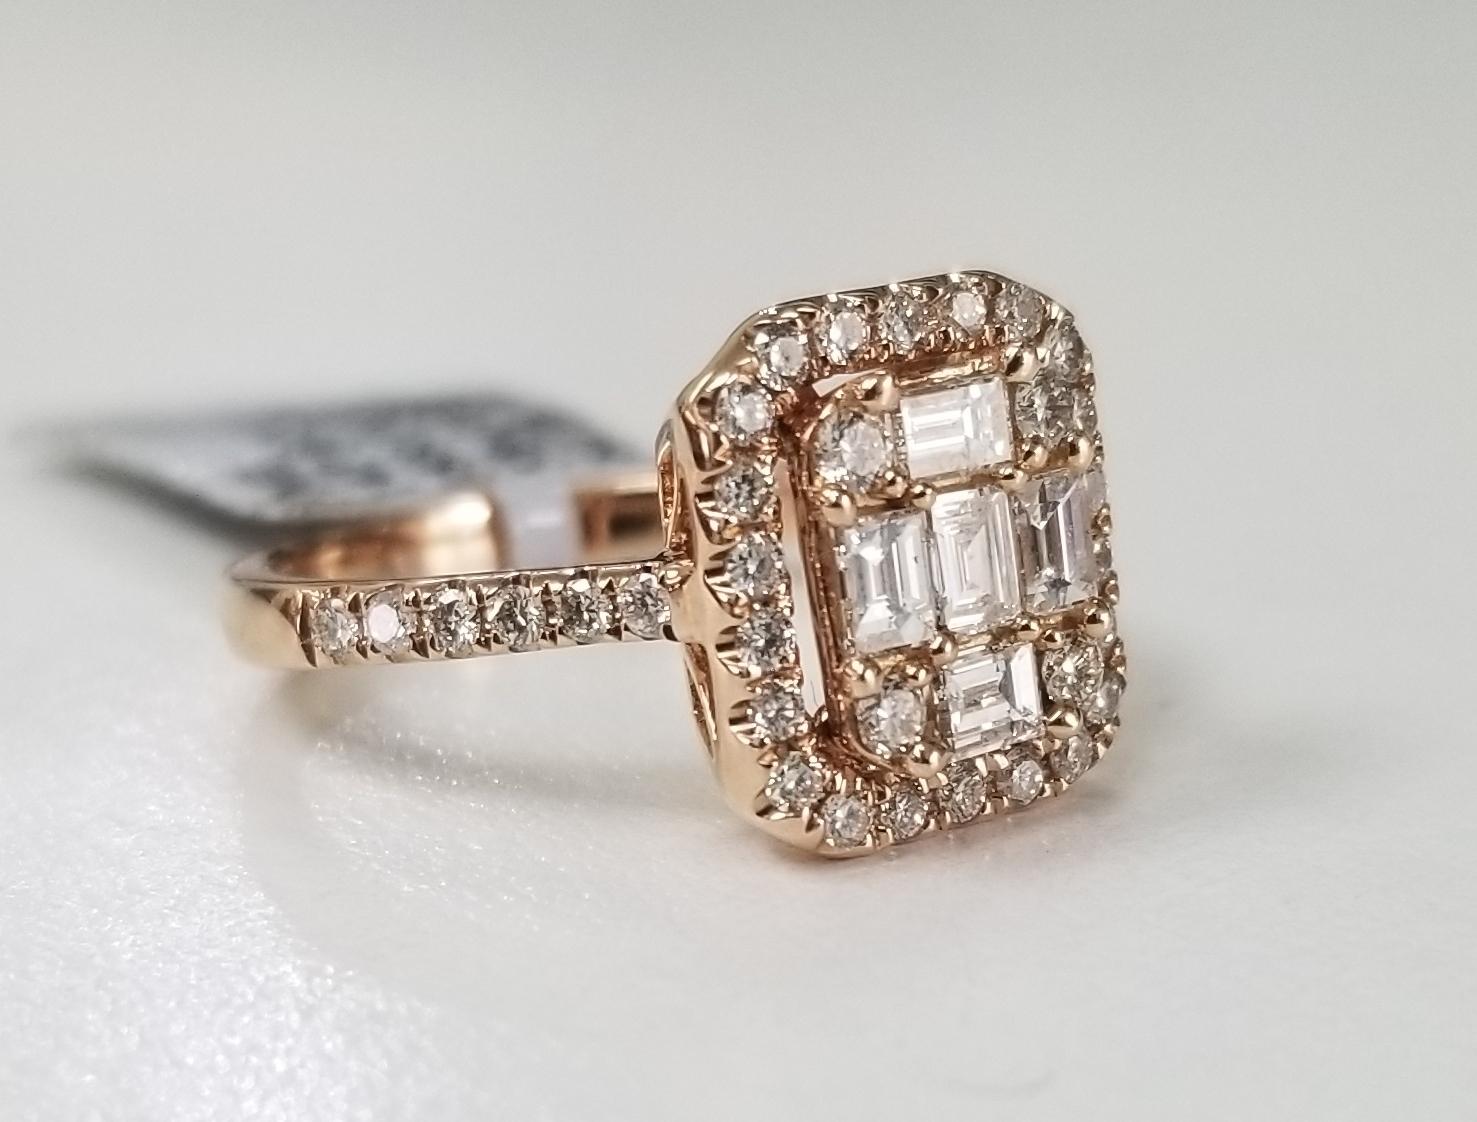 14 karat rose gold diamond solitaire halo style ring, containing 38 round full cut diamonds of very fine quality weighing .44cts. and 5 baguette cut diamonds weighing .42pts. ring size is 6.5 and is 10mm wide.